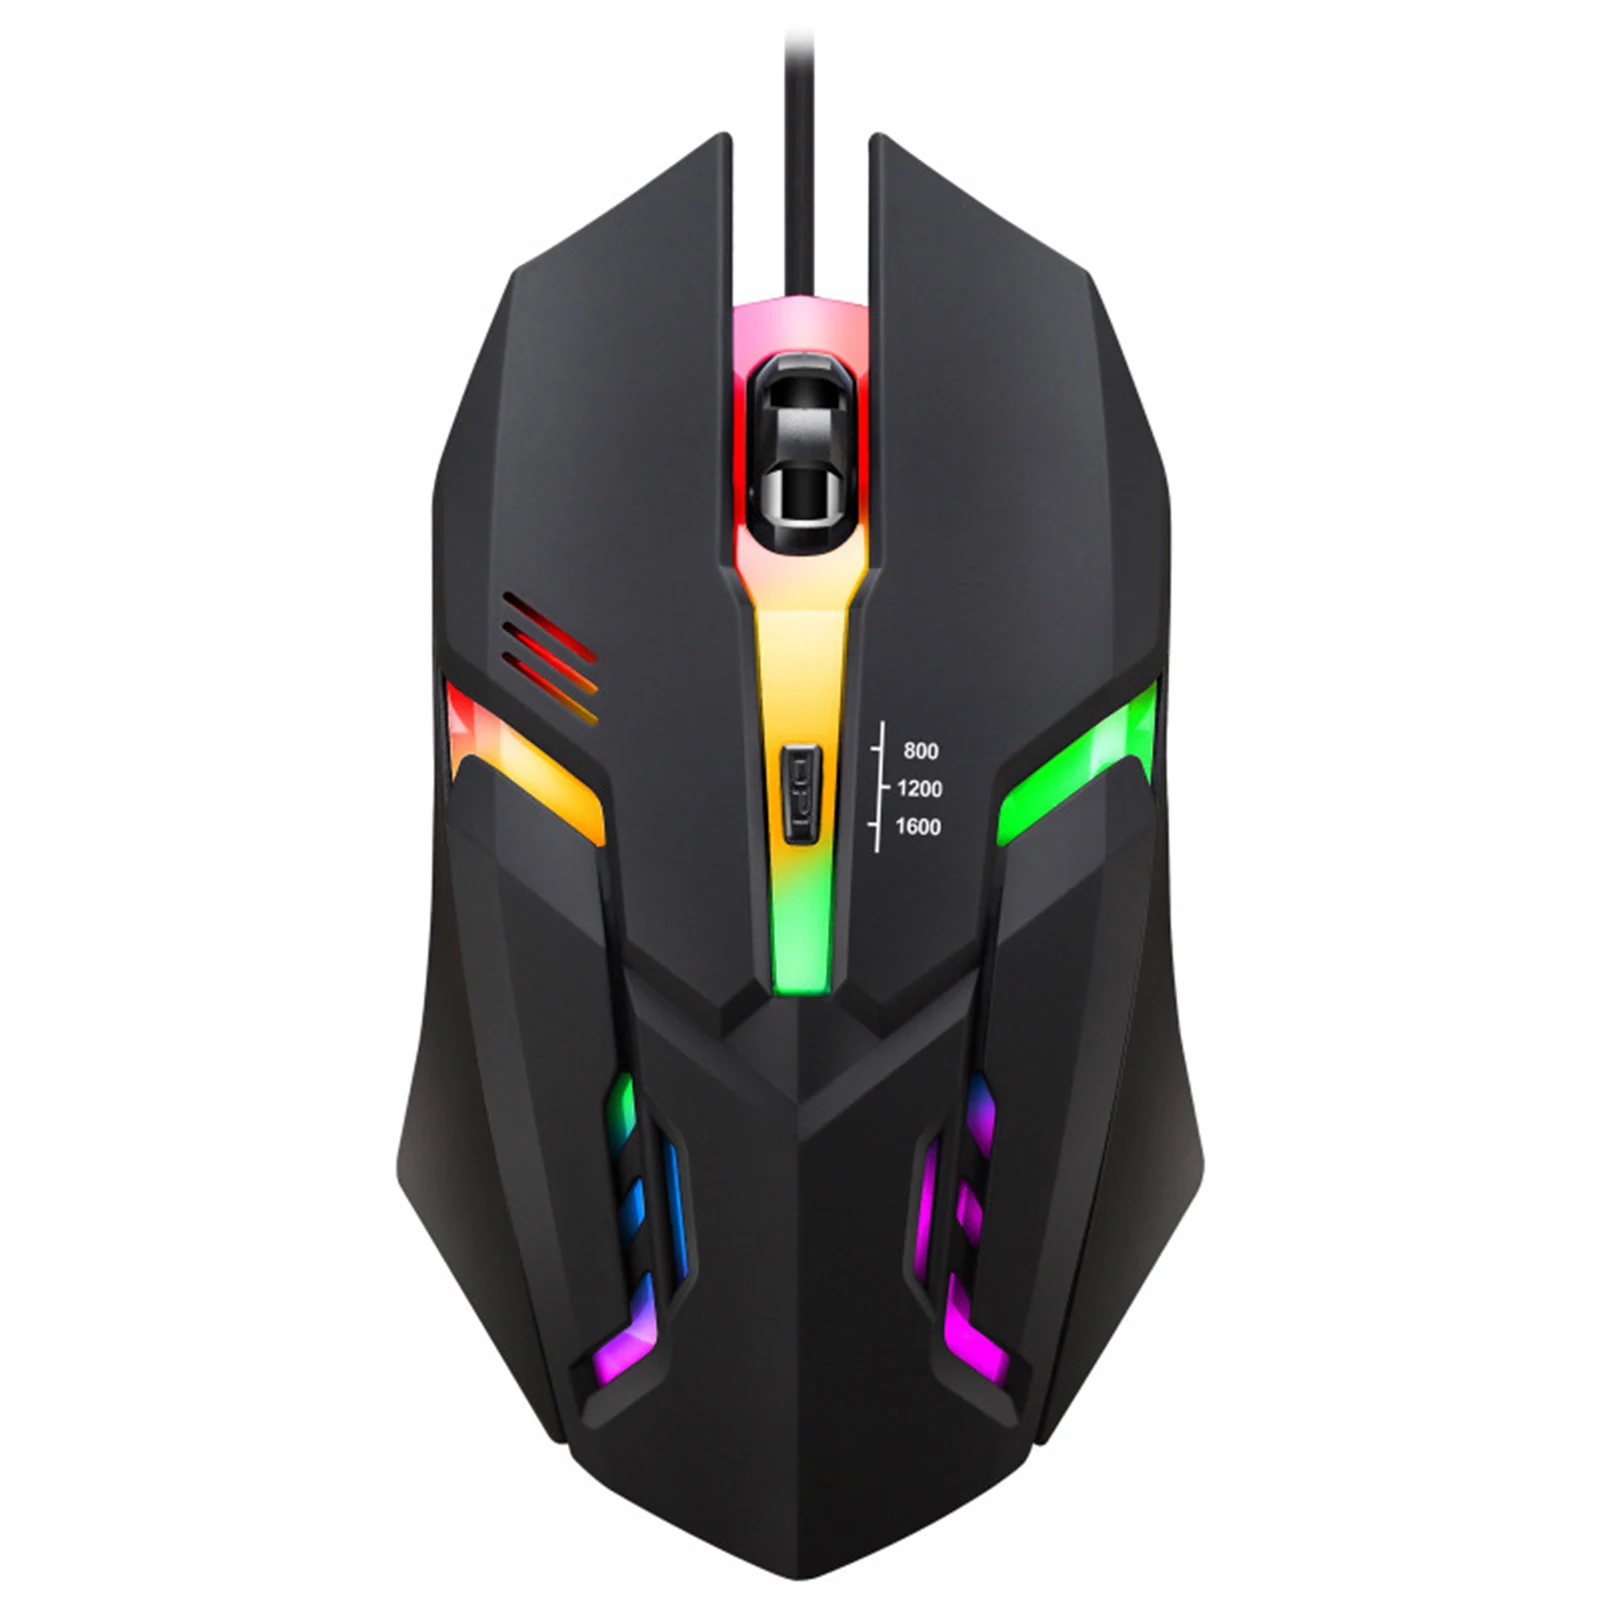 Купи Mute Wired Gaming Mouse 1600 DPI Optical 6 Button USB Mouse With RGB BackLight Mute Mice For Desktop Laptop Computer Gamer Mouse за 659 рублей в магазине AliExpress